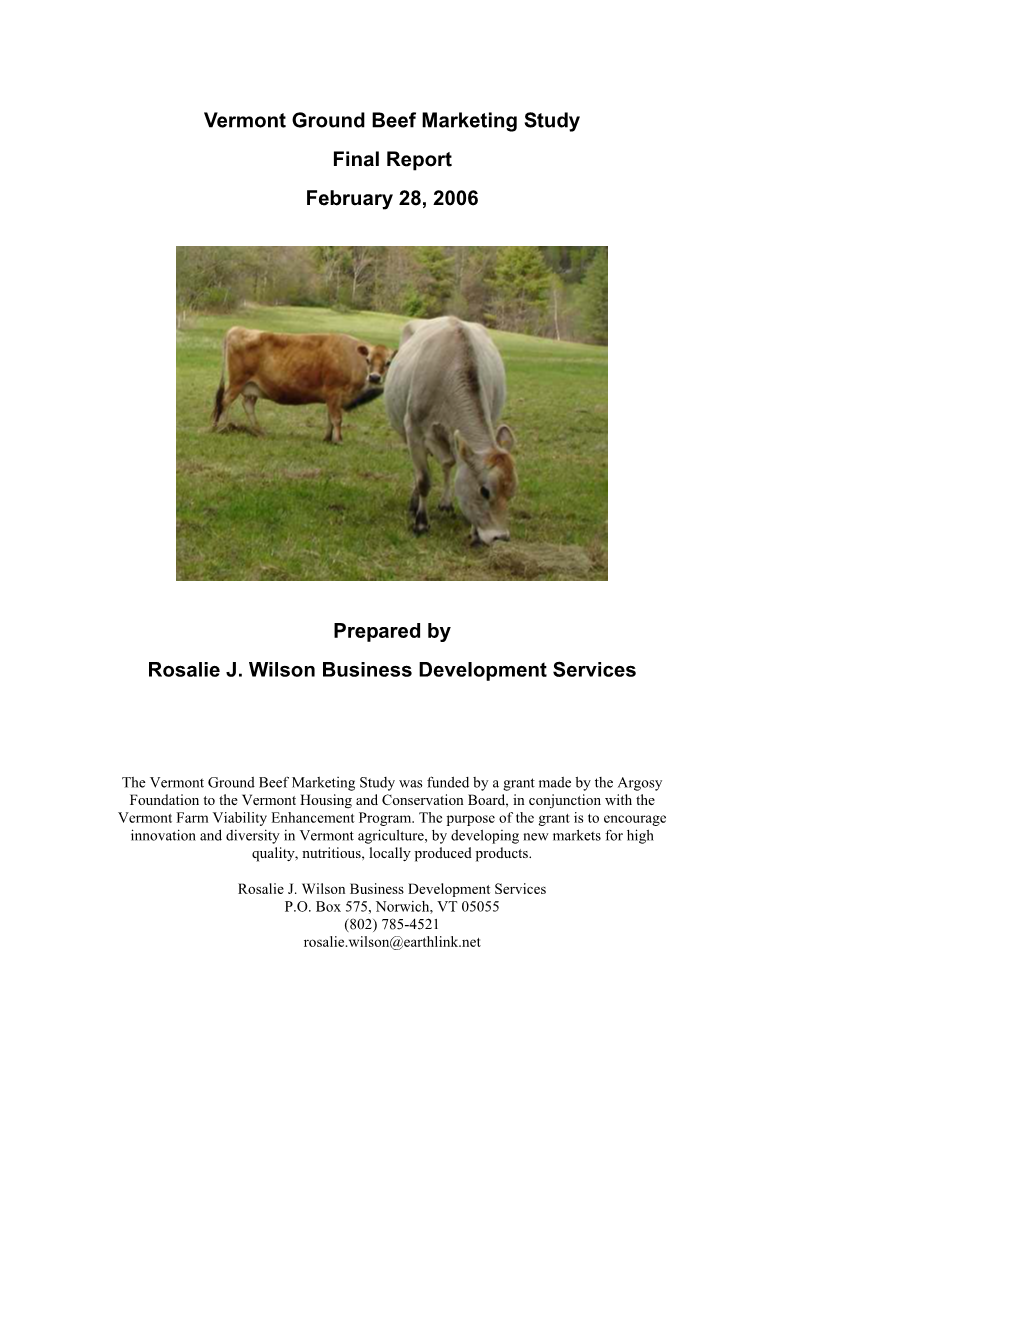 Vermont Ground Beef Marketing Study Final Report February 28, 2006